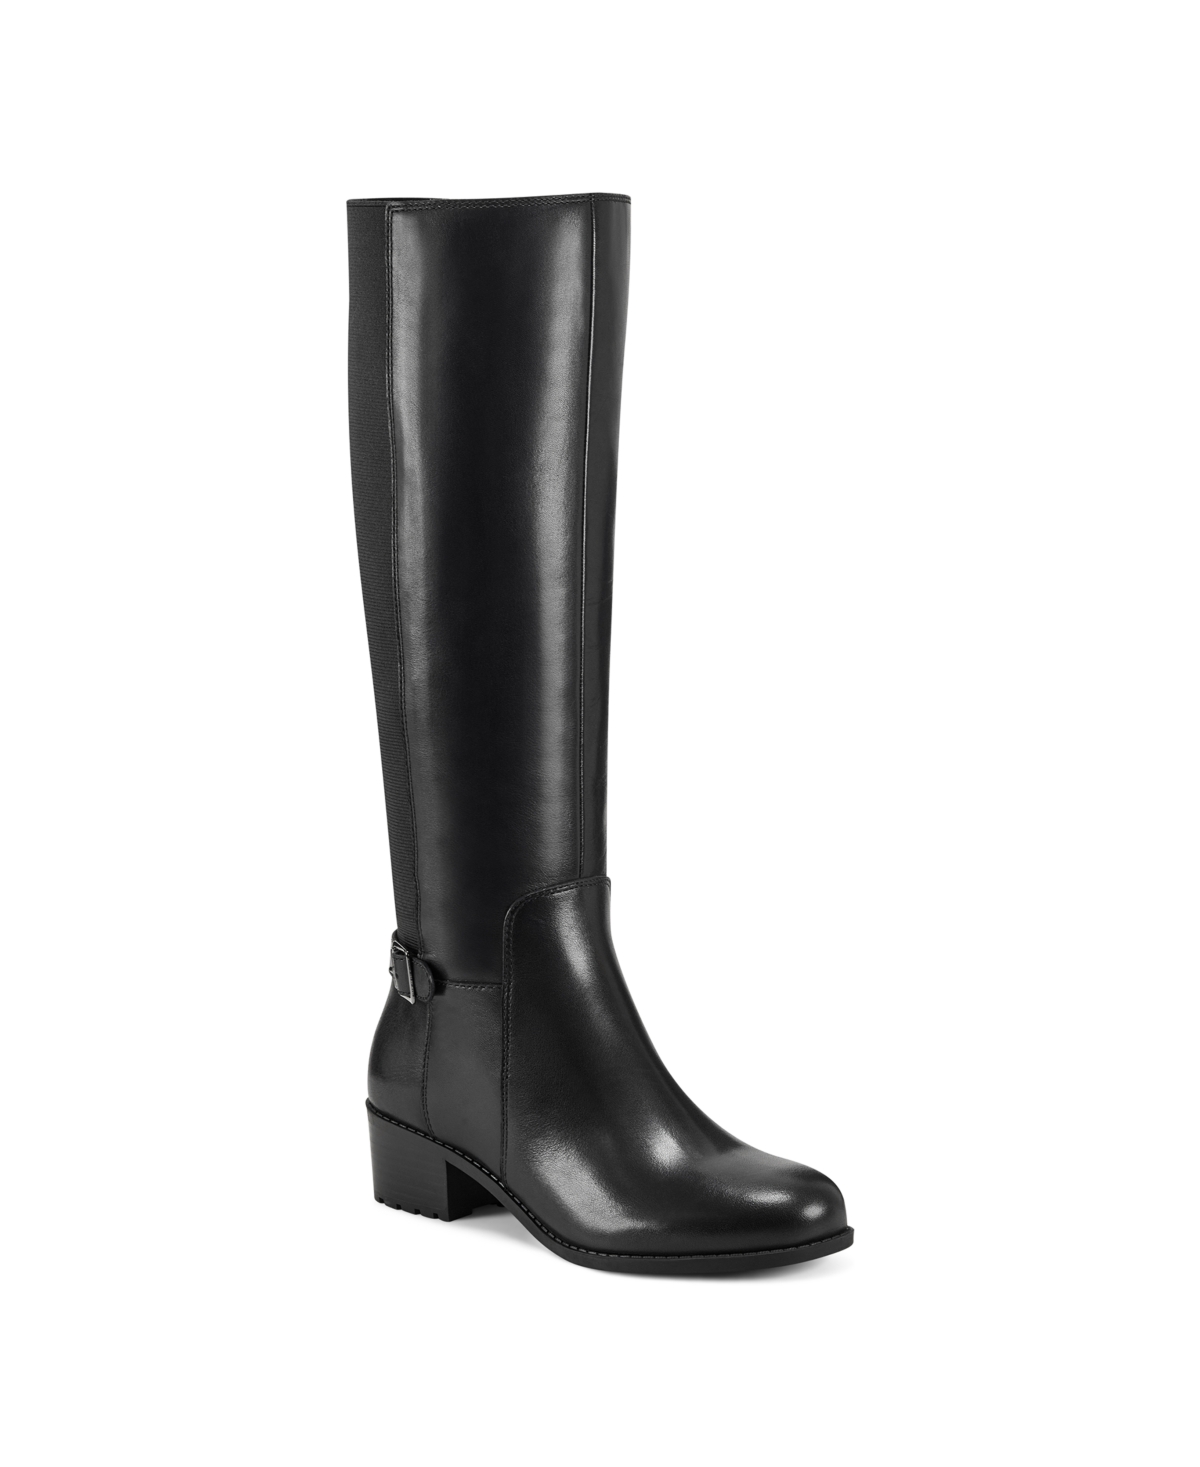 UPC 195608202441 product image for Easy Spirit Women's Chaza Tall Regular Calf Boots Women's Shoes | upcitemdb.com